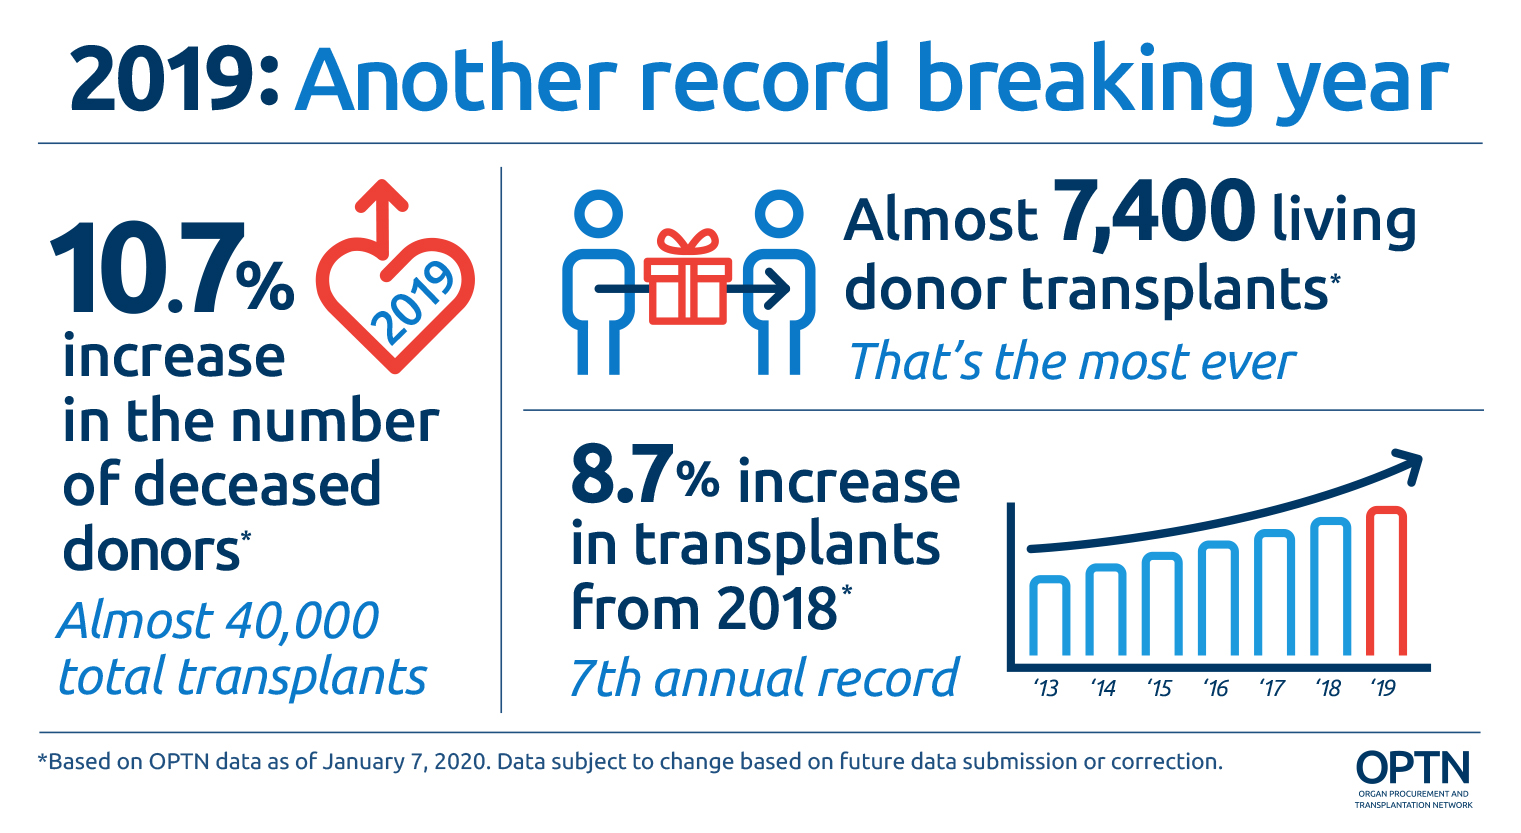 2019 record number of lives saved. 10.7 percent increase in the number of deceased donors - almost 40,000 total transplants. Almost 7,400 living donor transplants - new record number. 8.7 percent increase in transplants from 2018 - 7th year of increase. Based on OPTN data as of January 7, 2020. Data subject to change based on future data submission or correction.